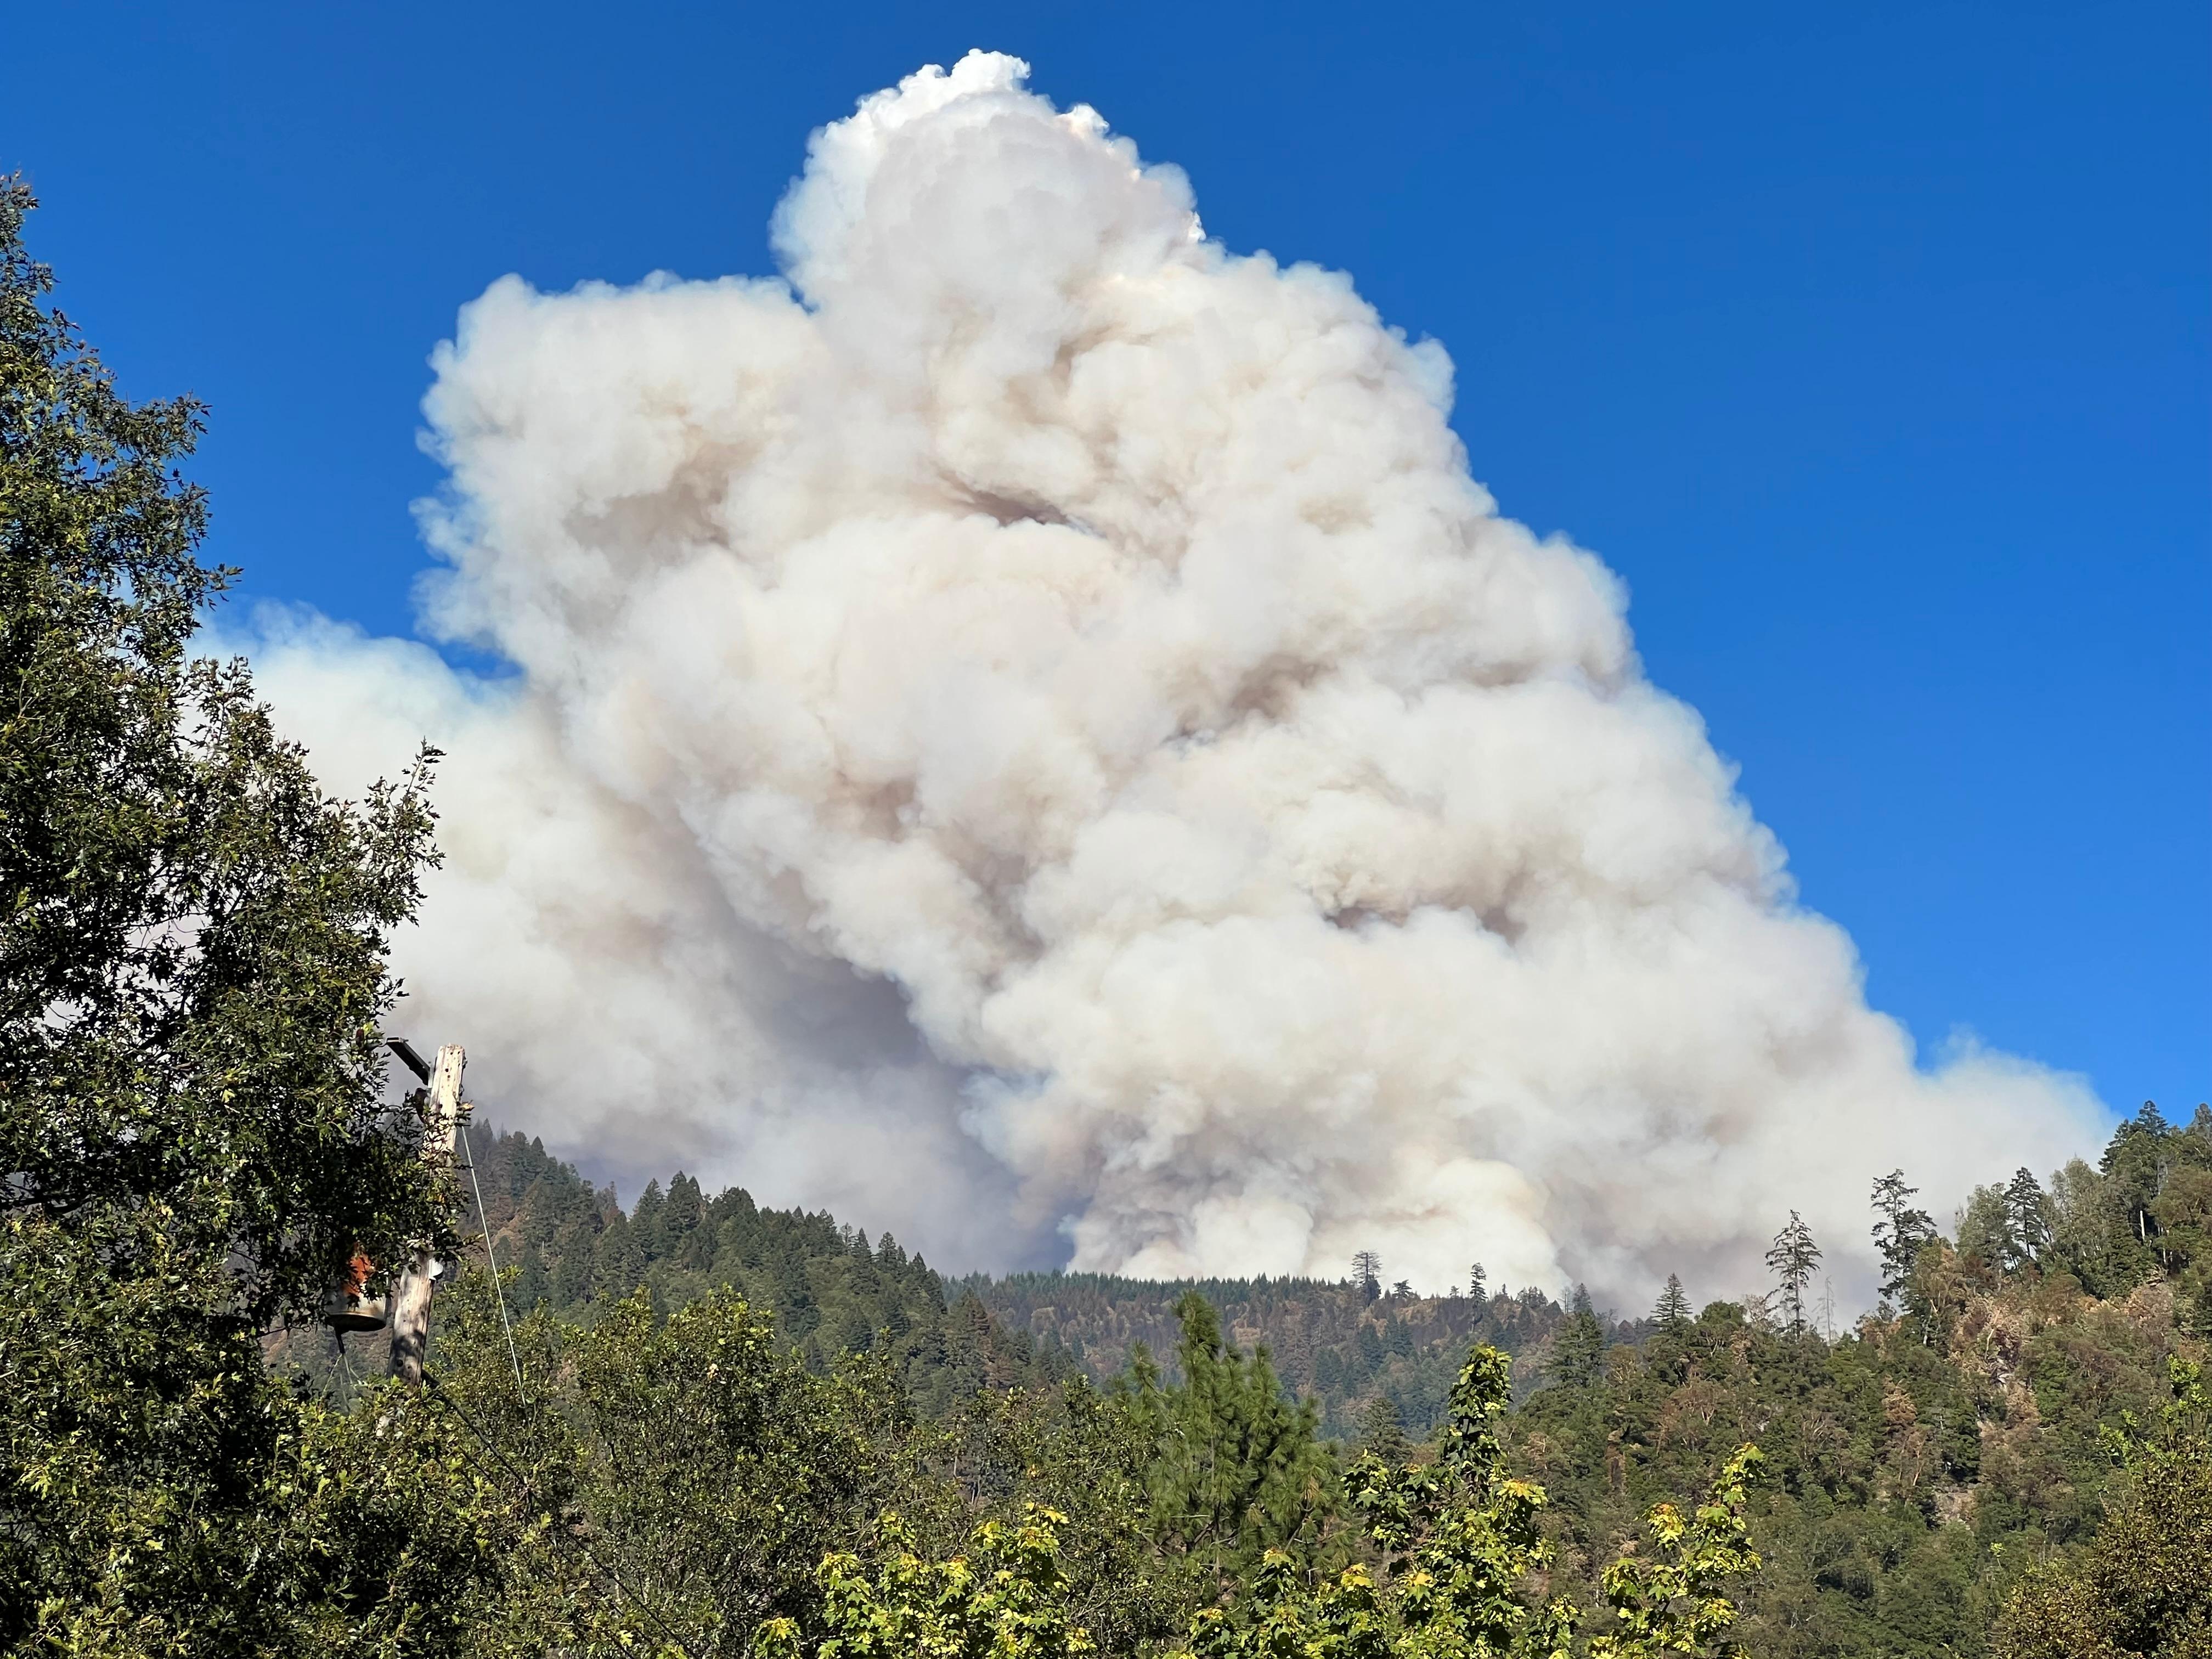 A large plume of smoke rises over mountains